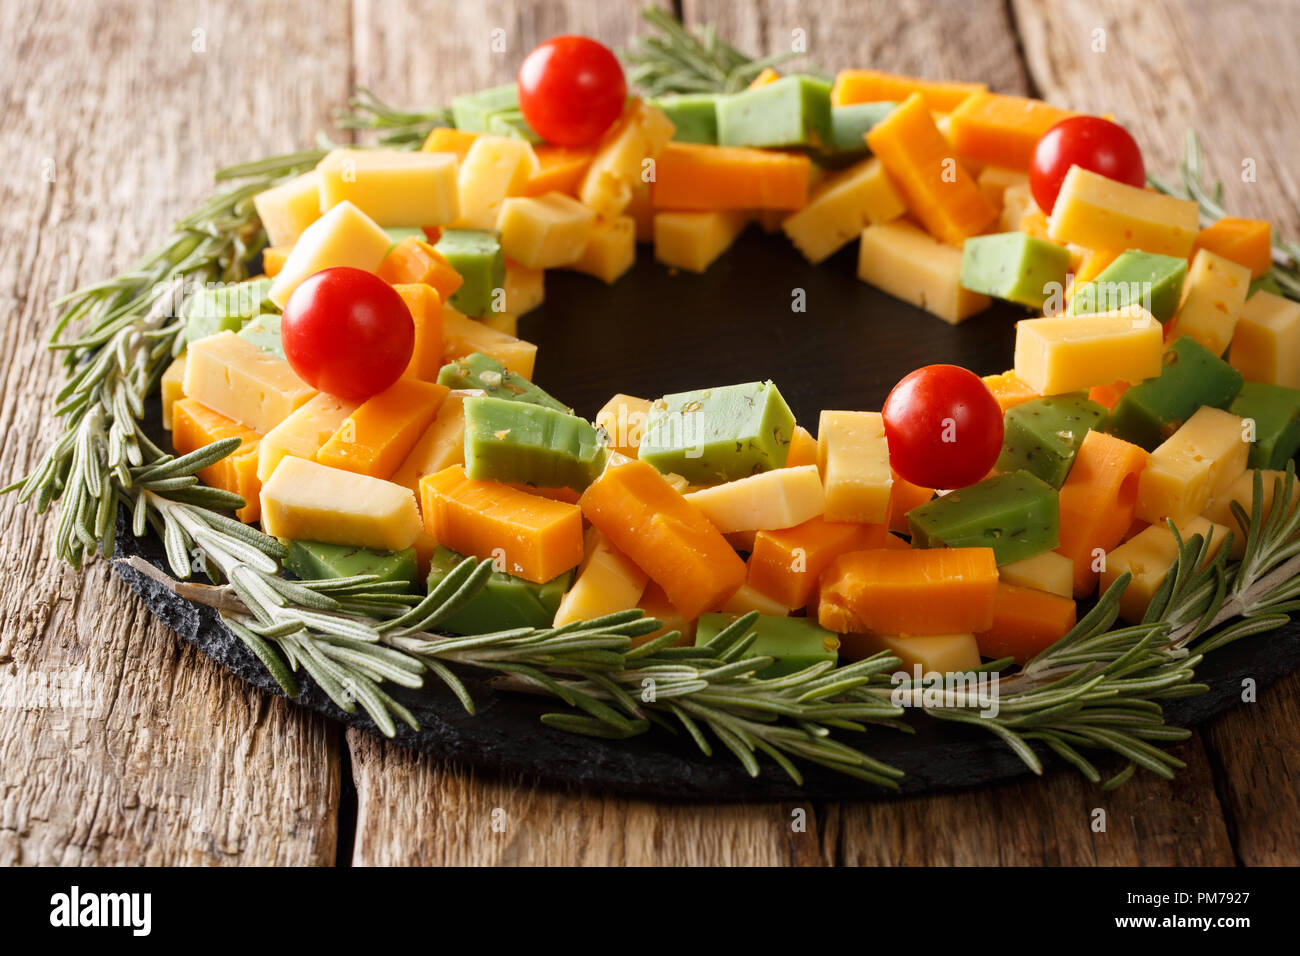 Sliced pesto cheese, cheddar, Mimolette with tomatoes and rosemary close-up on the table. Christmas decor. horizontal Stock Photo